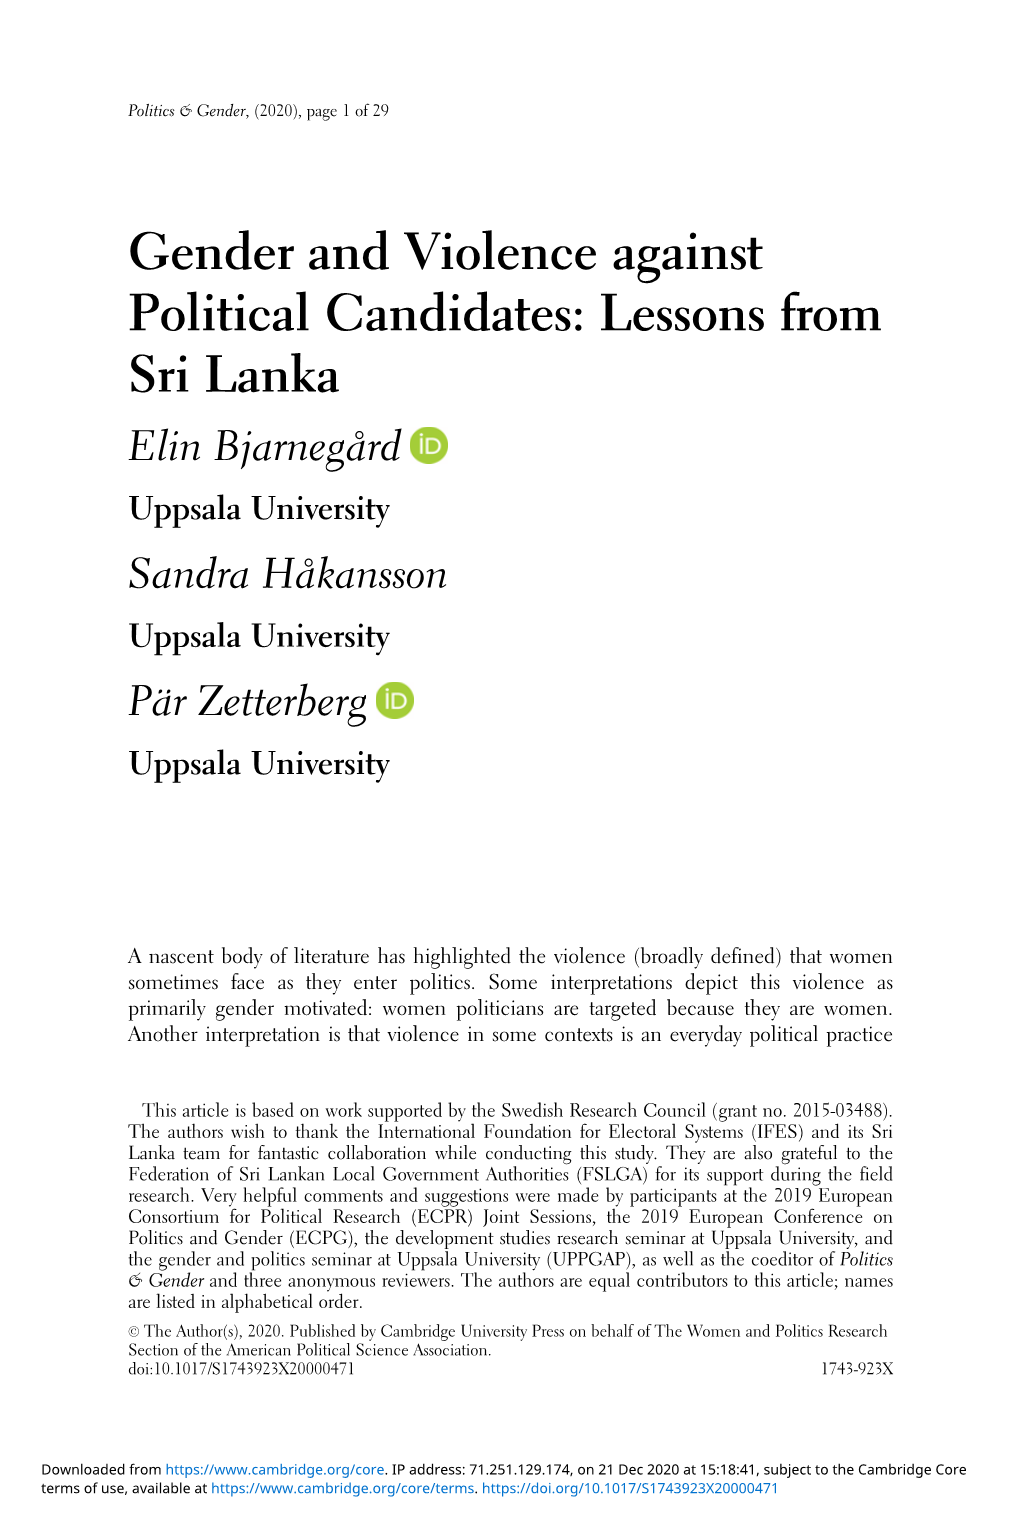 Gender and Violence Against Political Candidates: Lessons from Sri Lanka